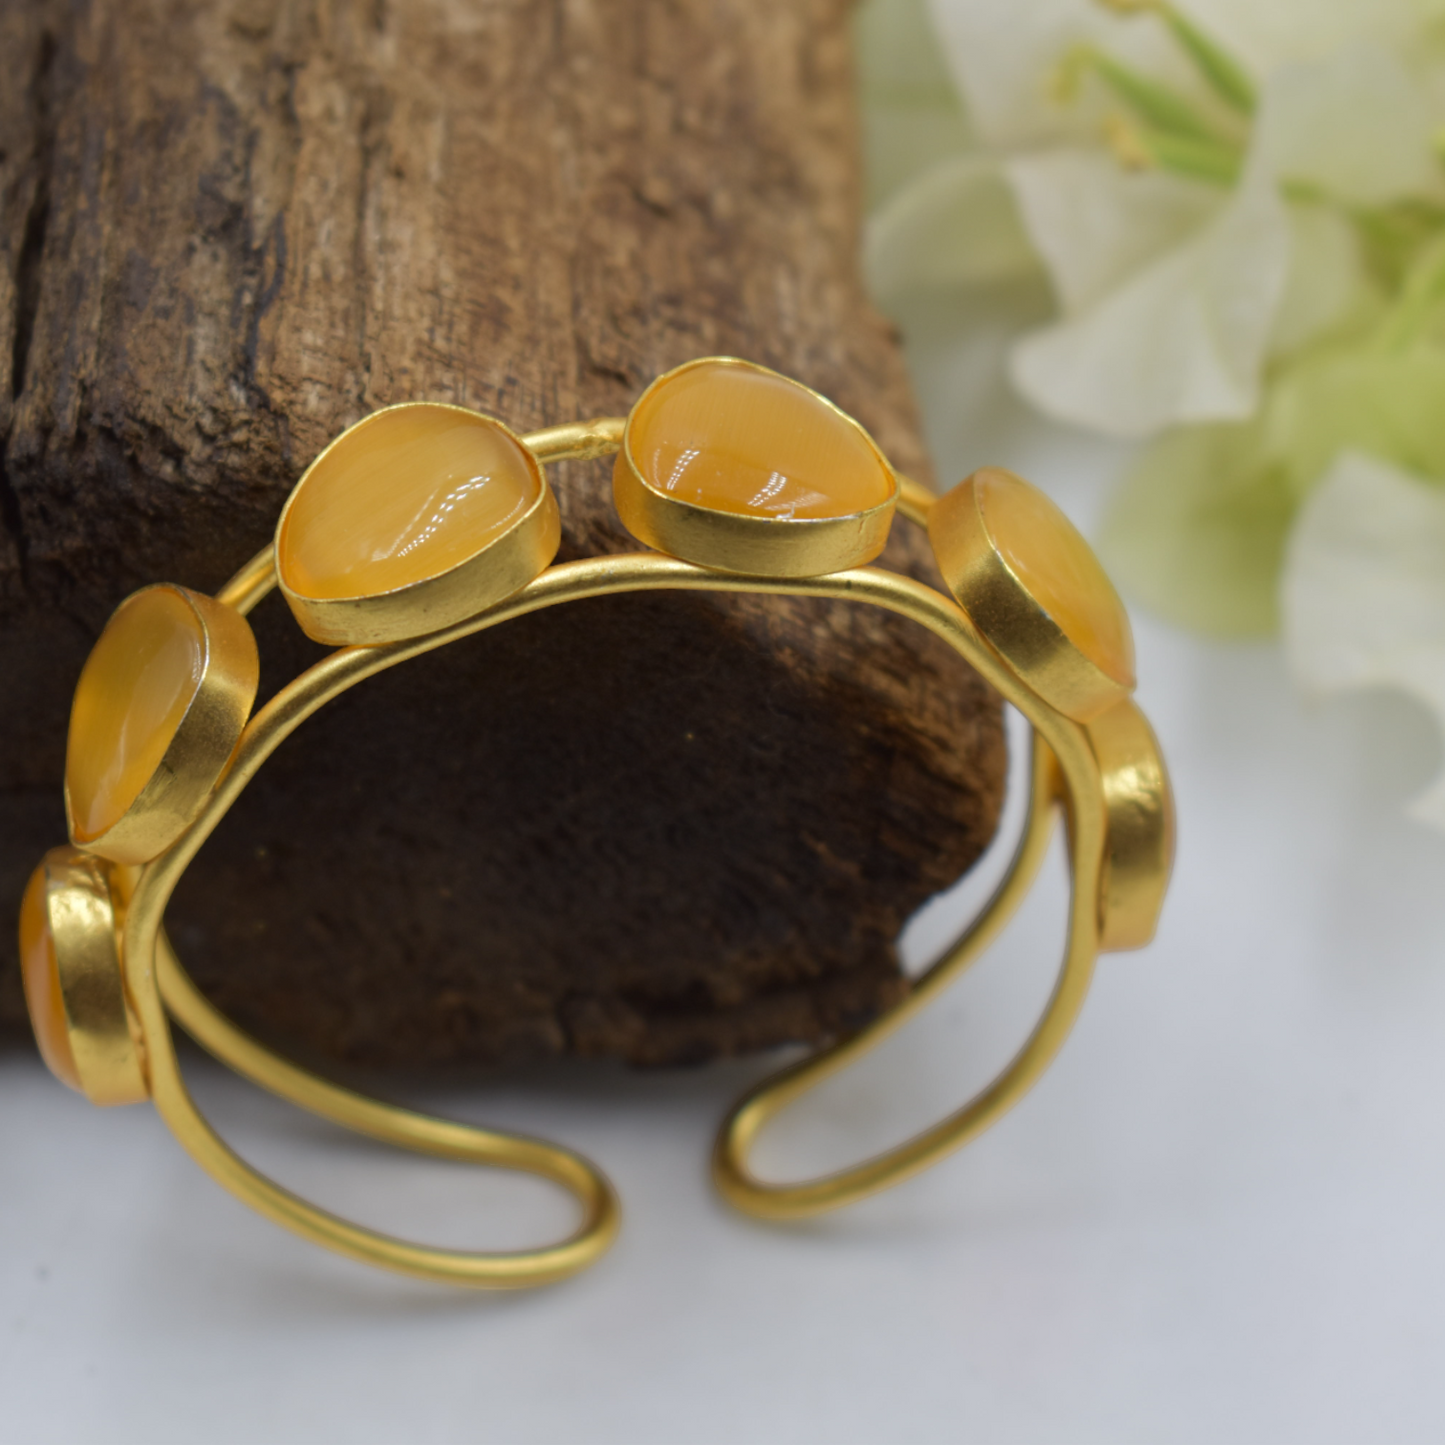 A piece of stone goldplated brass bangle